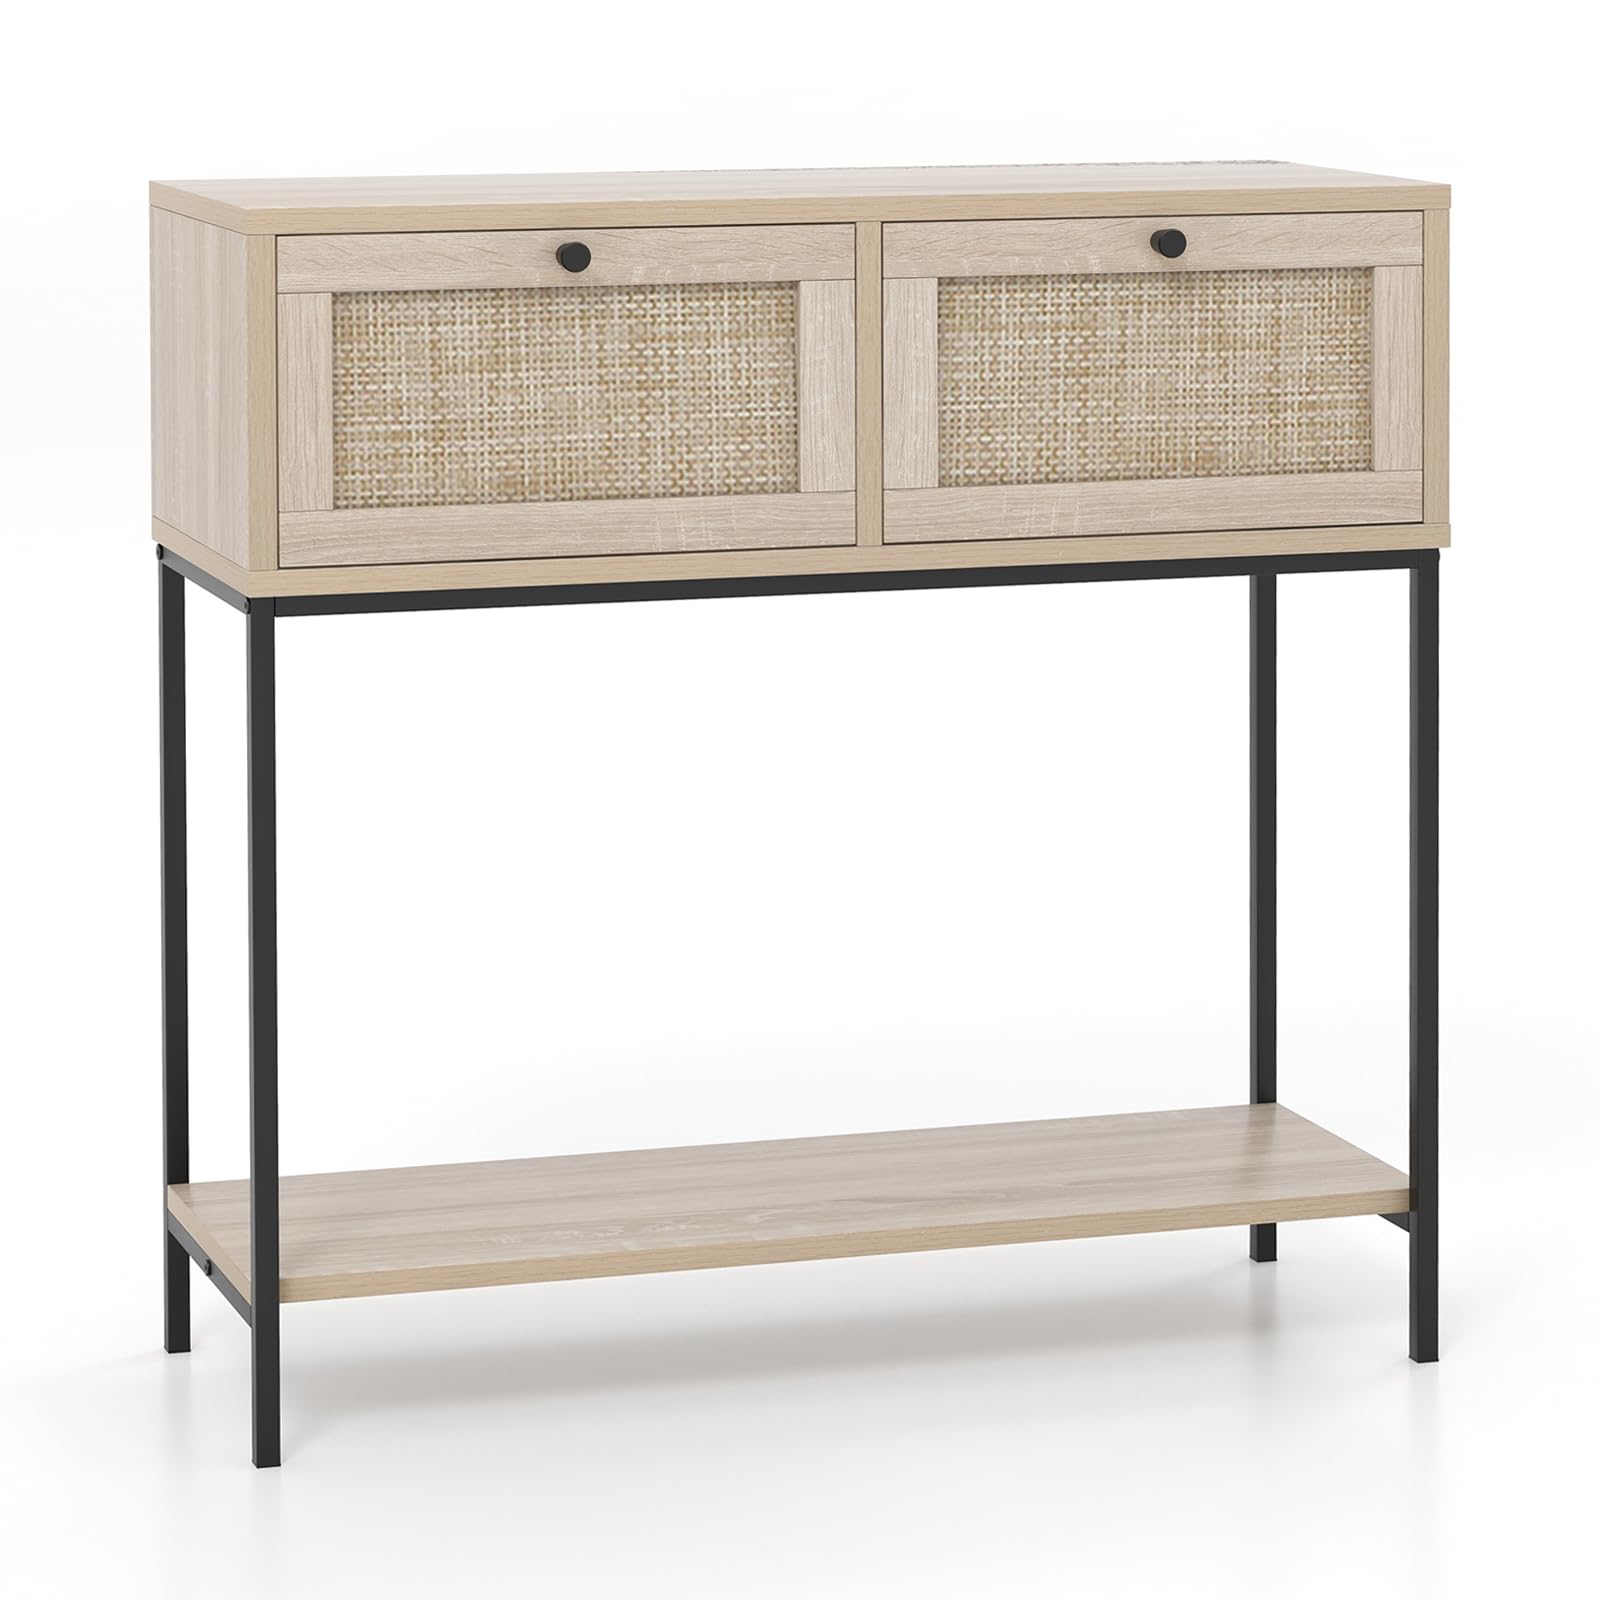 Giantex Console Table with Rattan Drawers - 31.5" Entryway Table w/ 2 Drawers & Open Storage Shelf